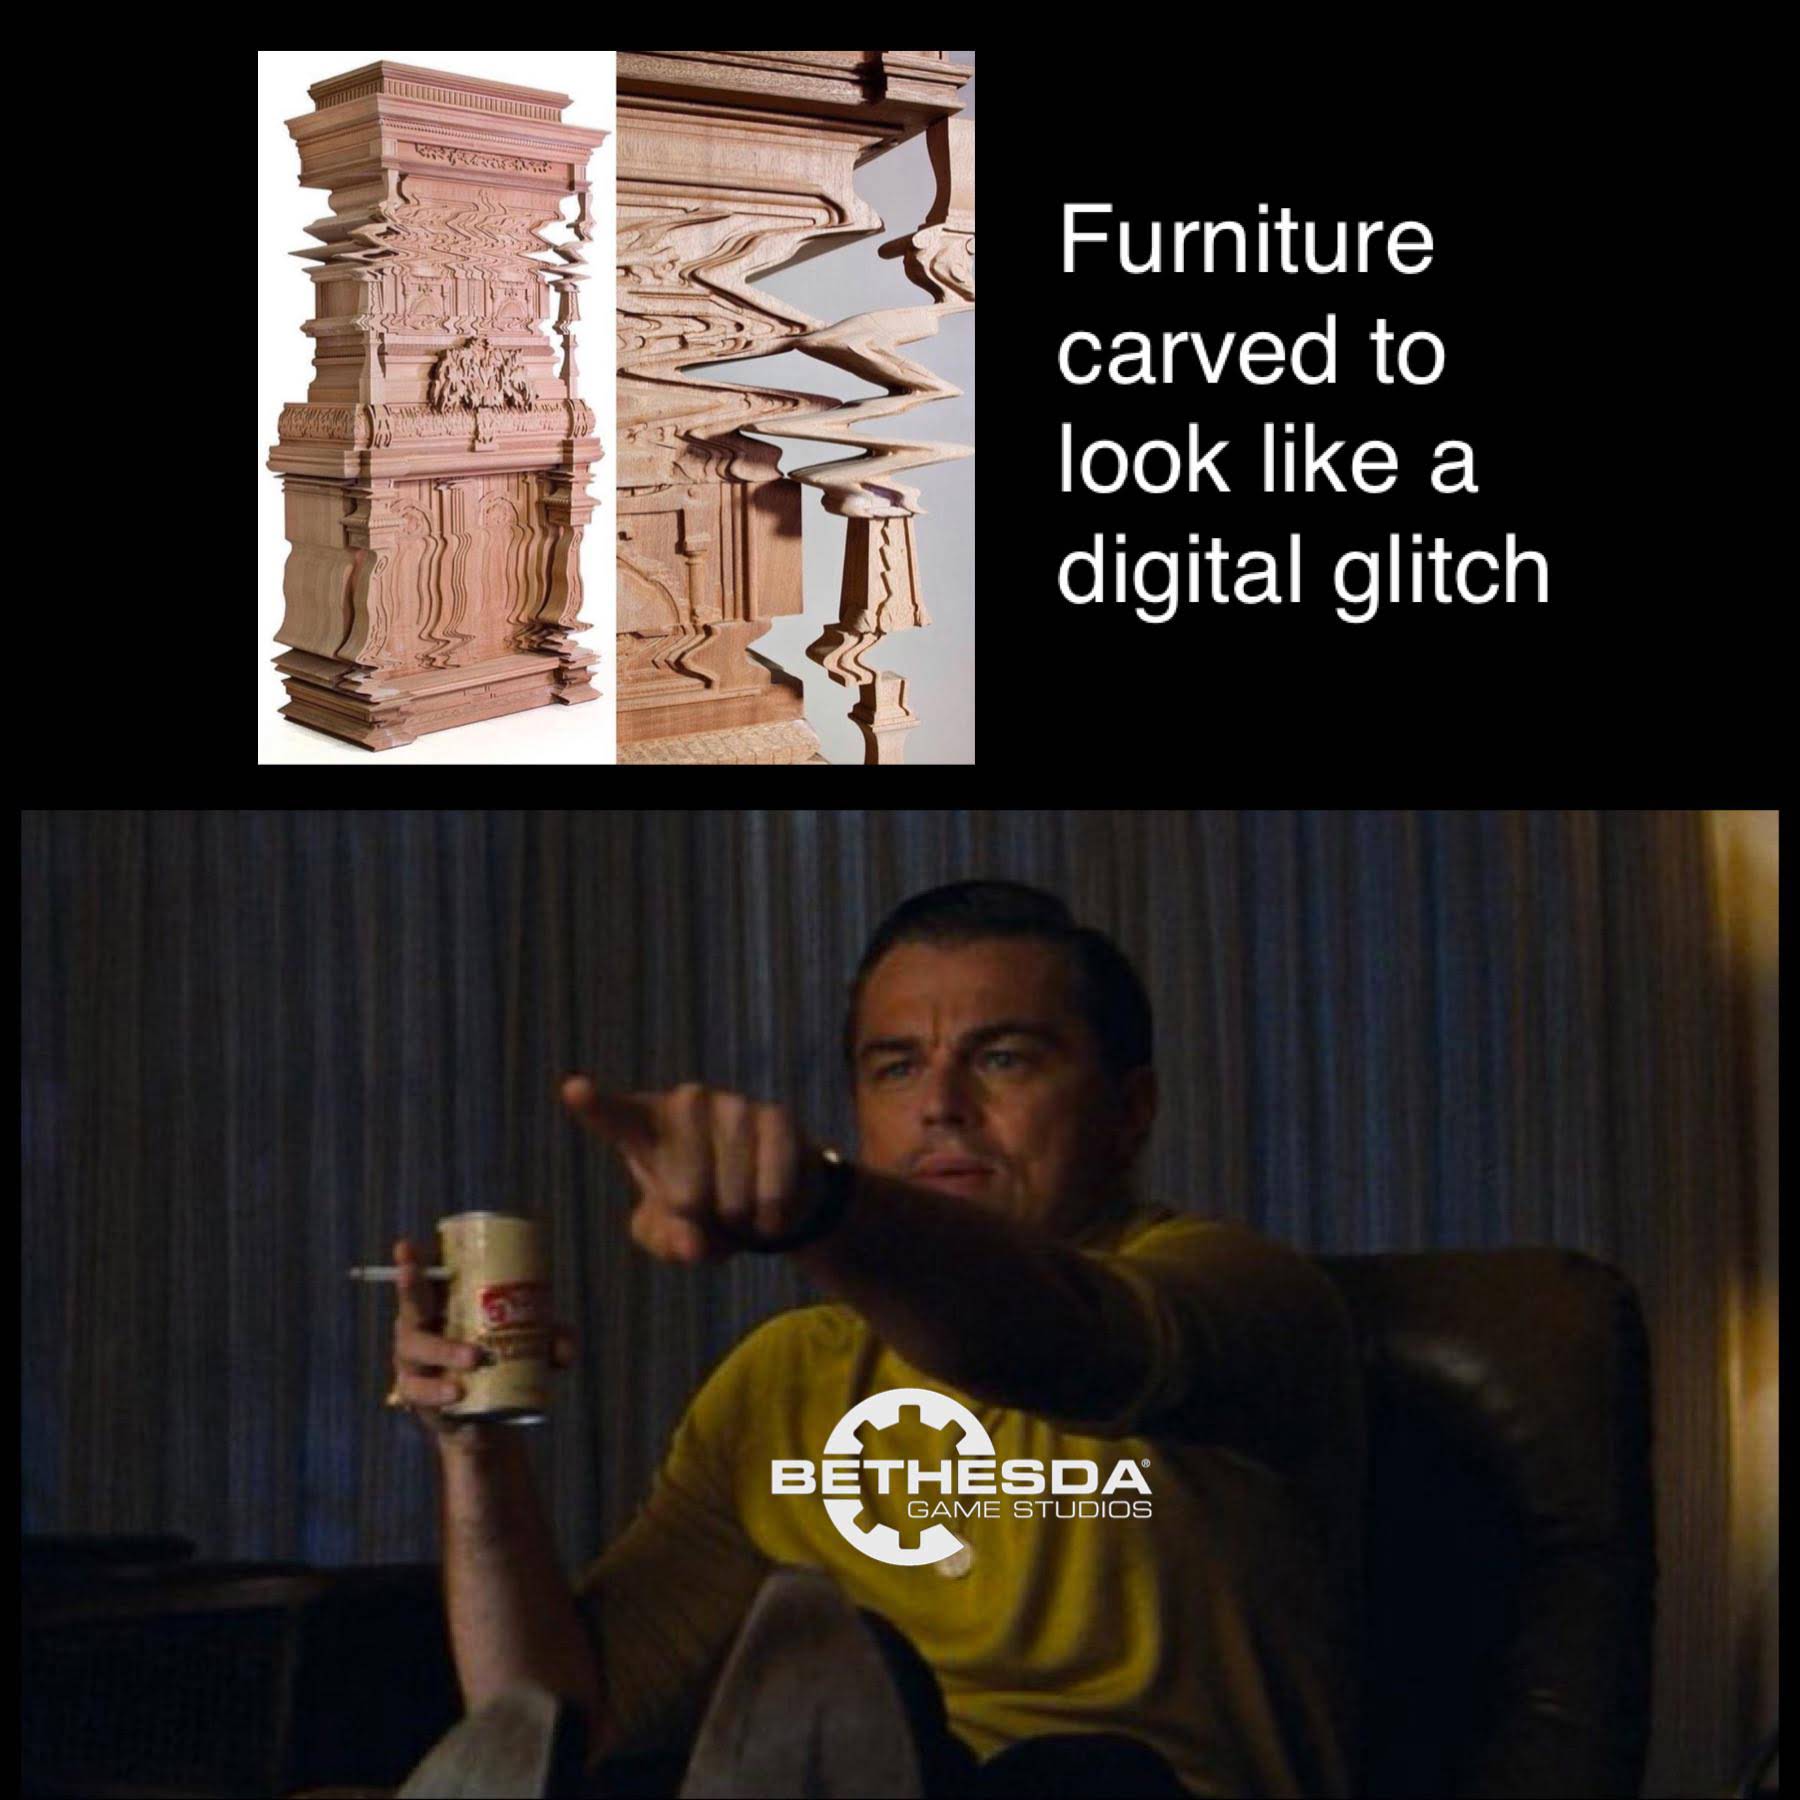 dank memes - me when they say the title - Furniture carved to look a digital glitch Bethesda Game Studios